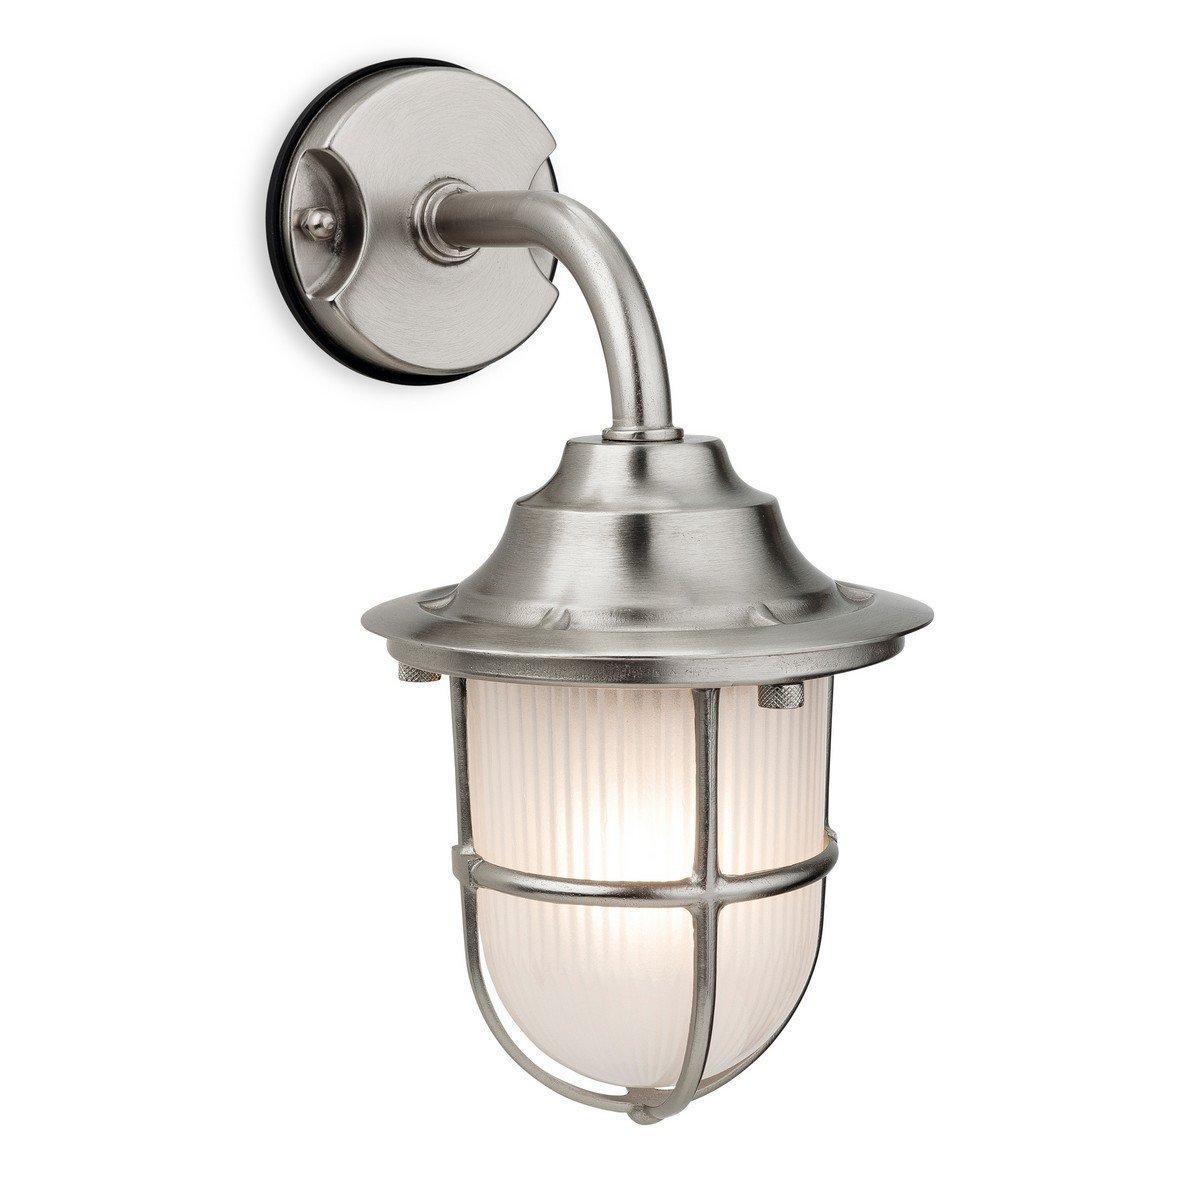 Nautic 1 Light Outdoor Wall Light Nickel Frosted Glass IP64 E27